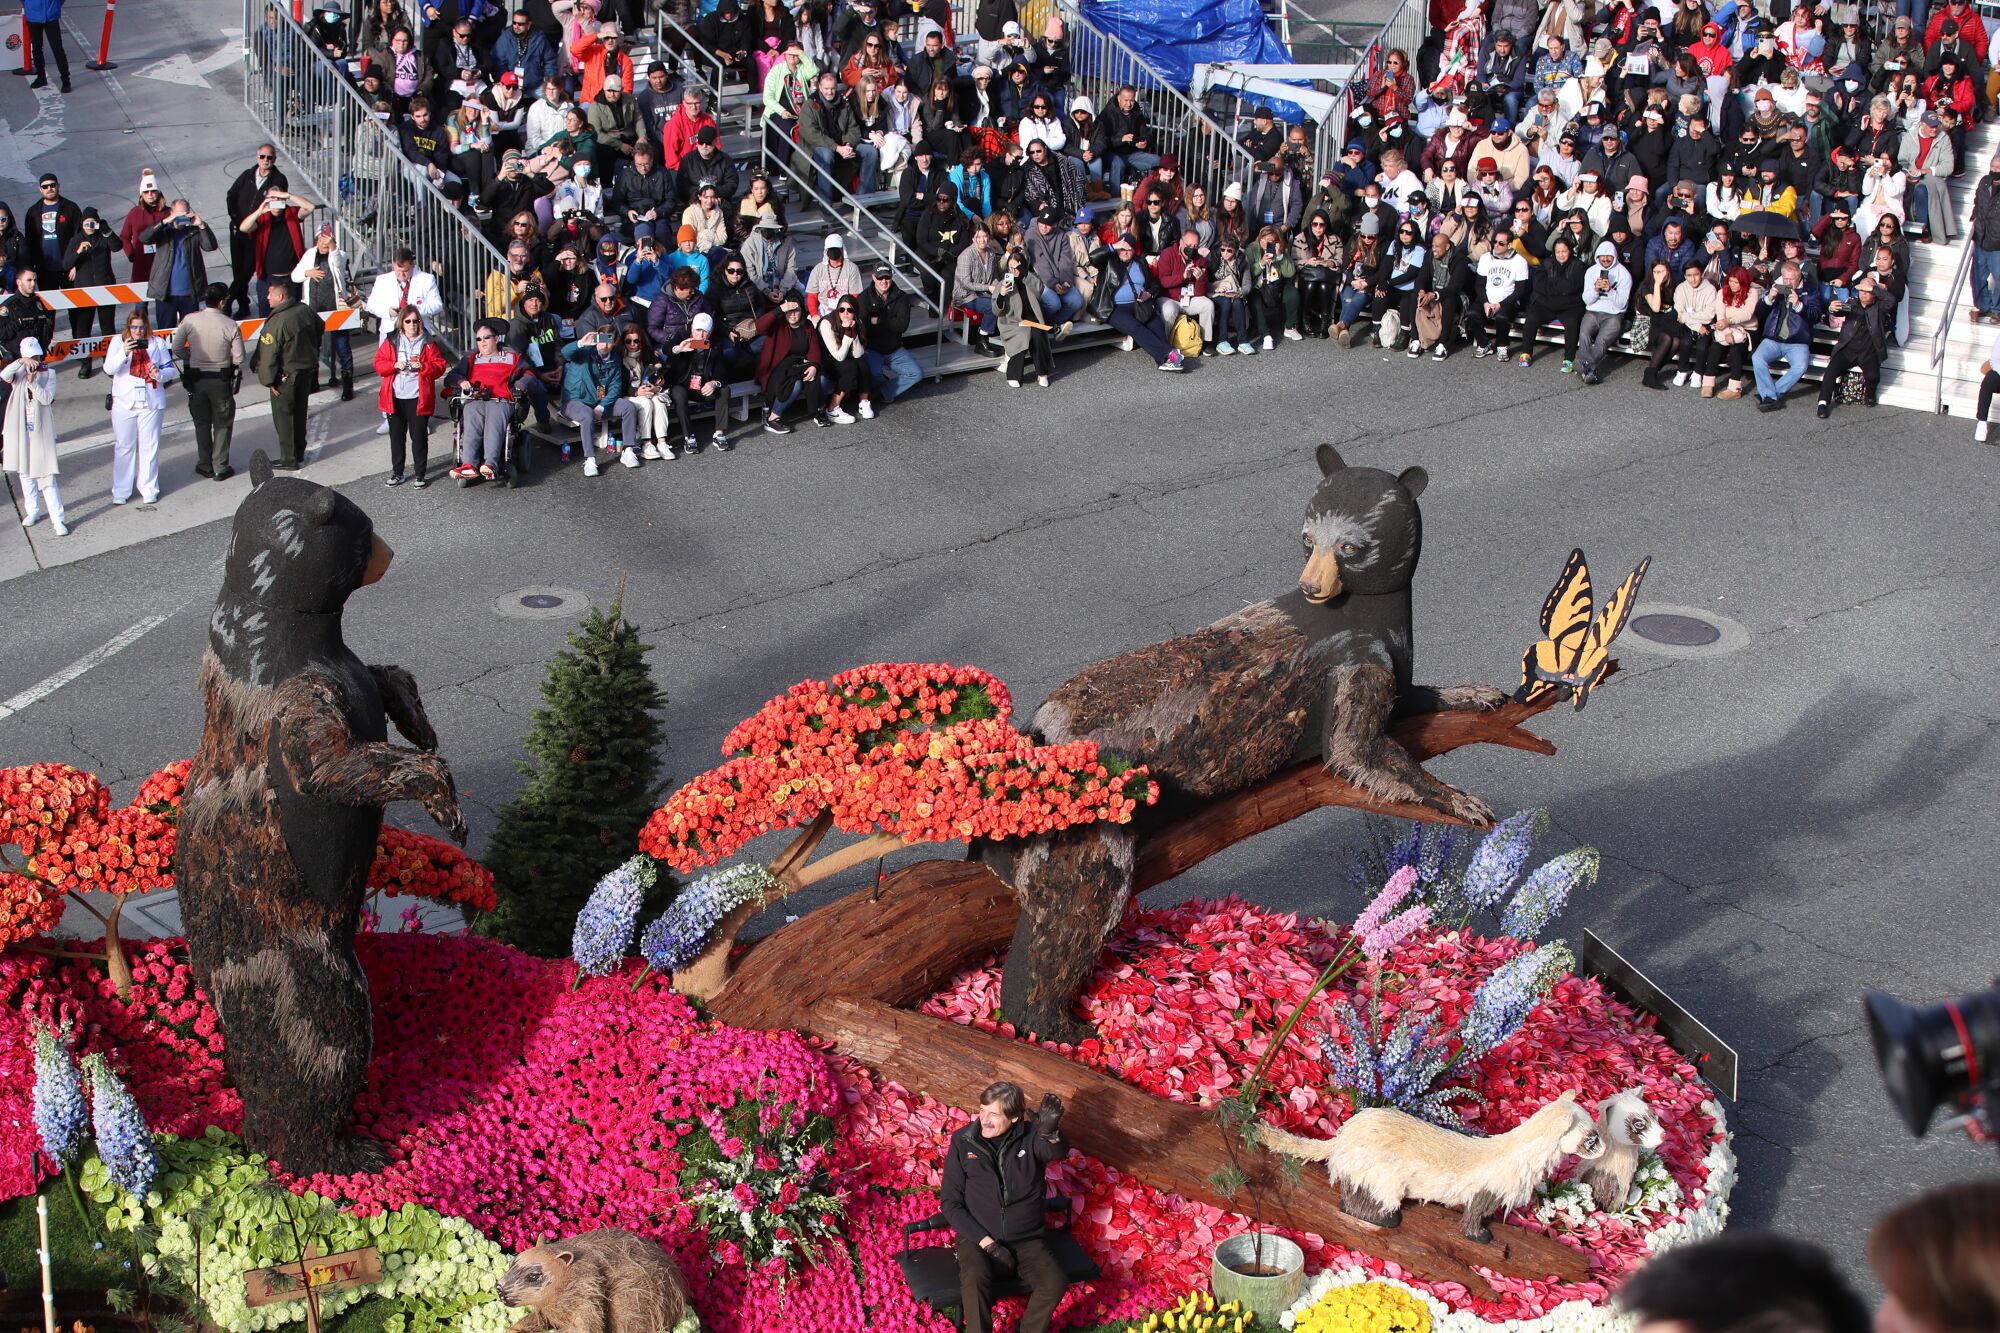 Bears and other animals on Mutual of Omaha's Wild Kingdom float at the Rose Parade.